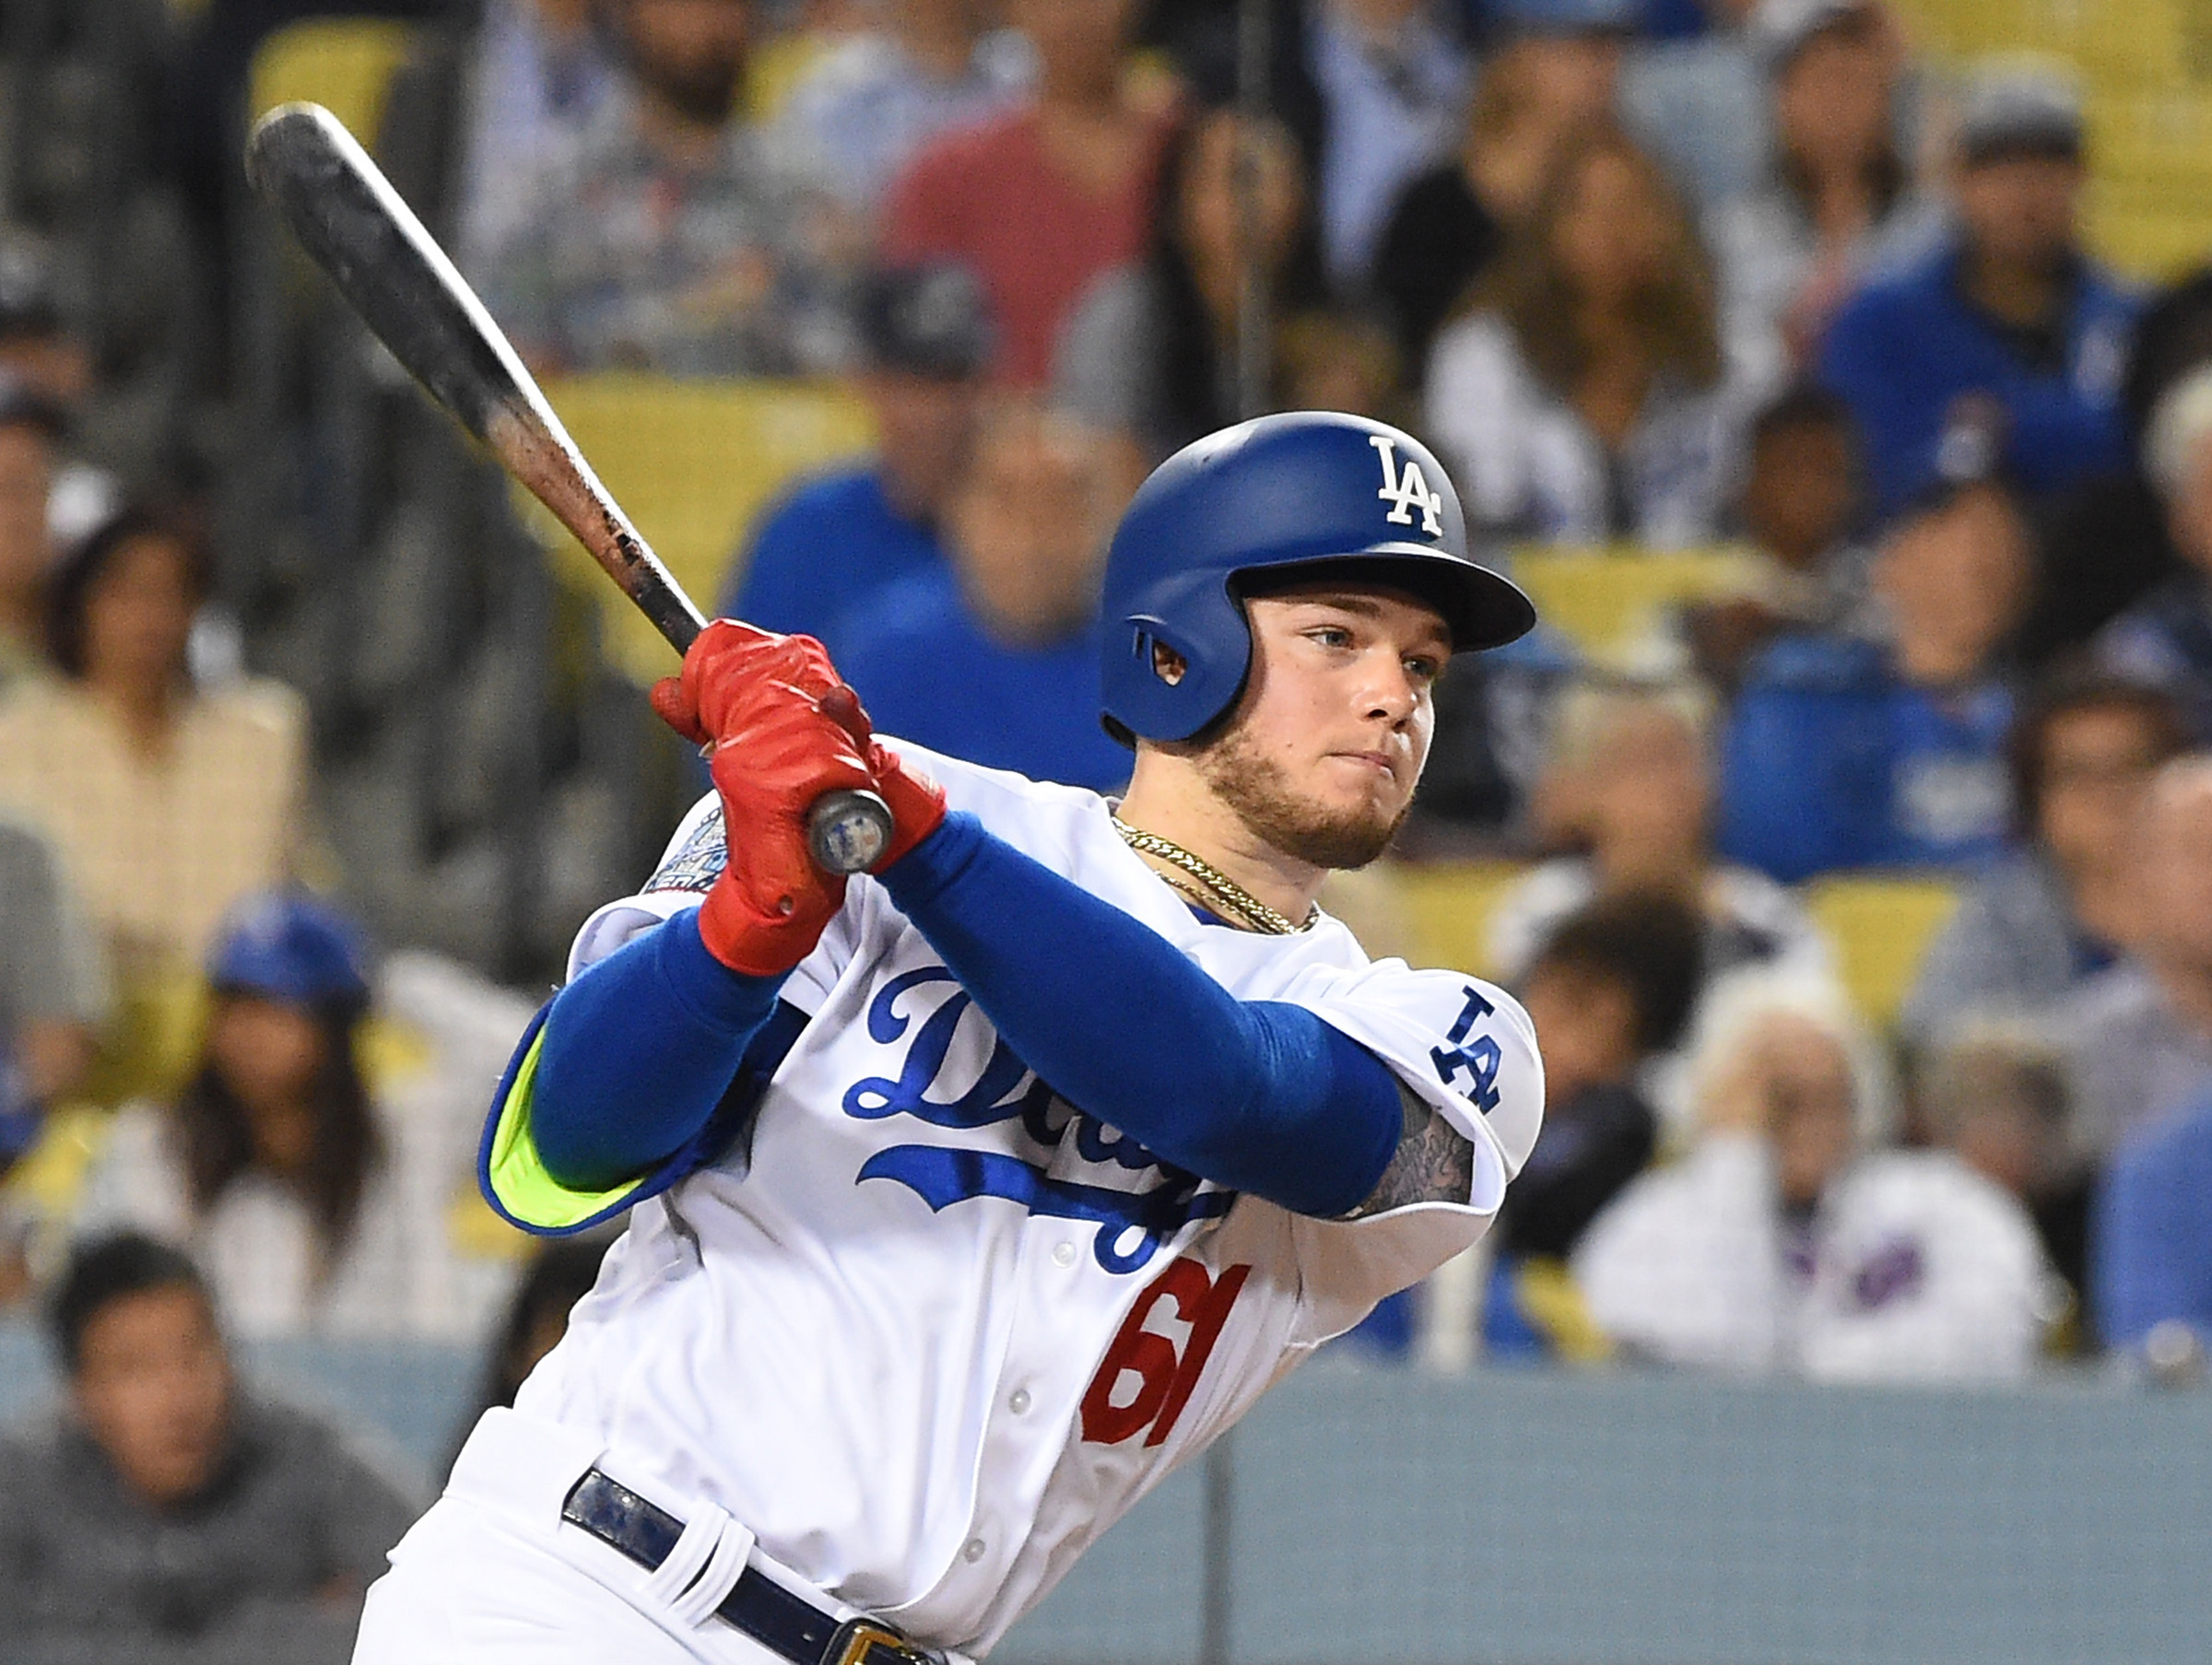 2019 Prospects Los Angeles Dodgers Top 10 Prospects Baseball